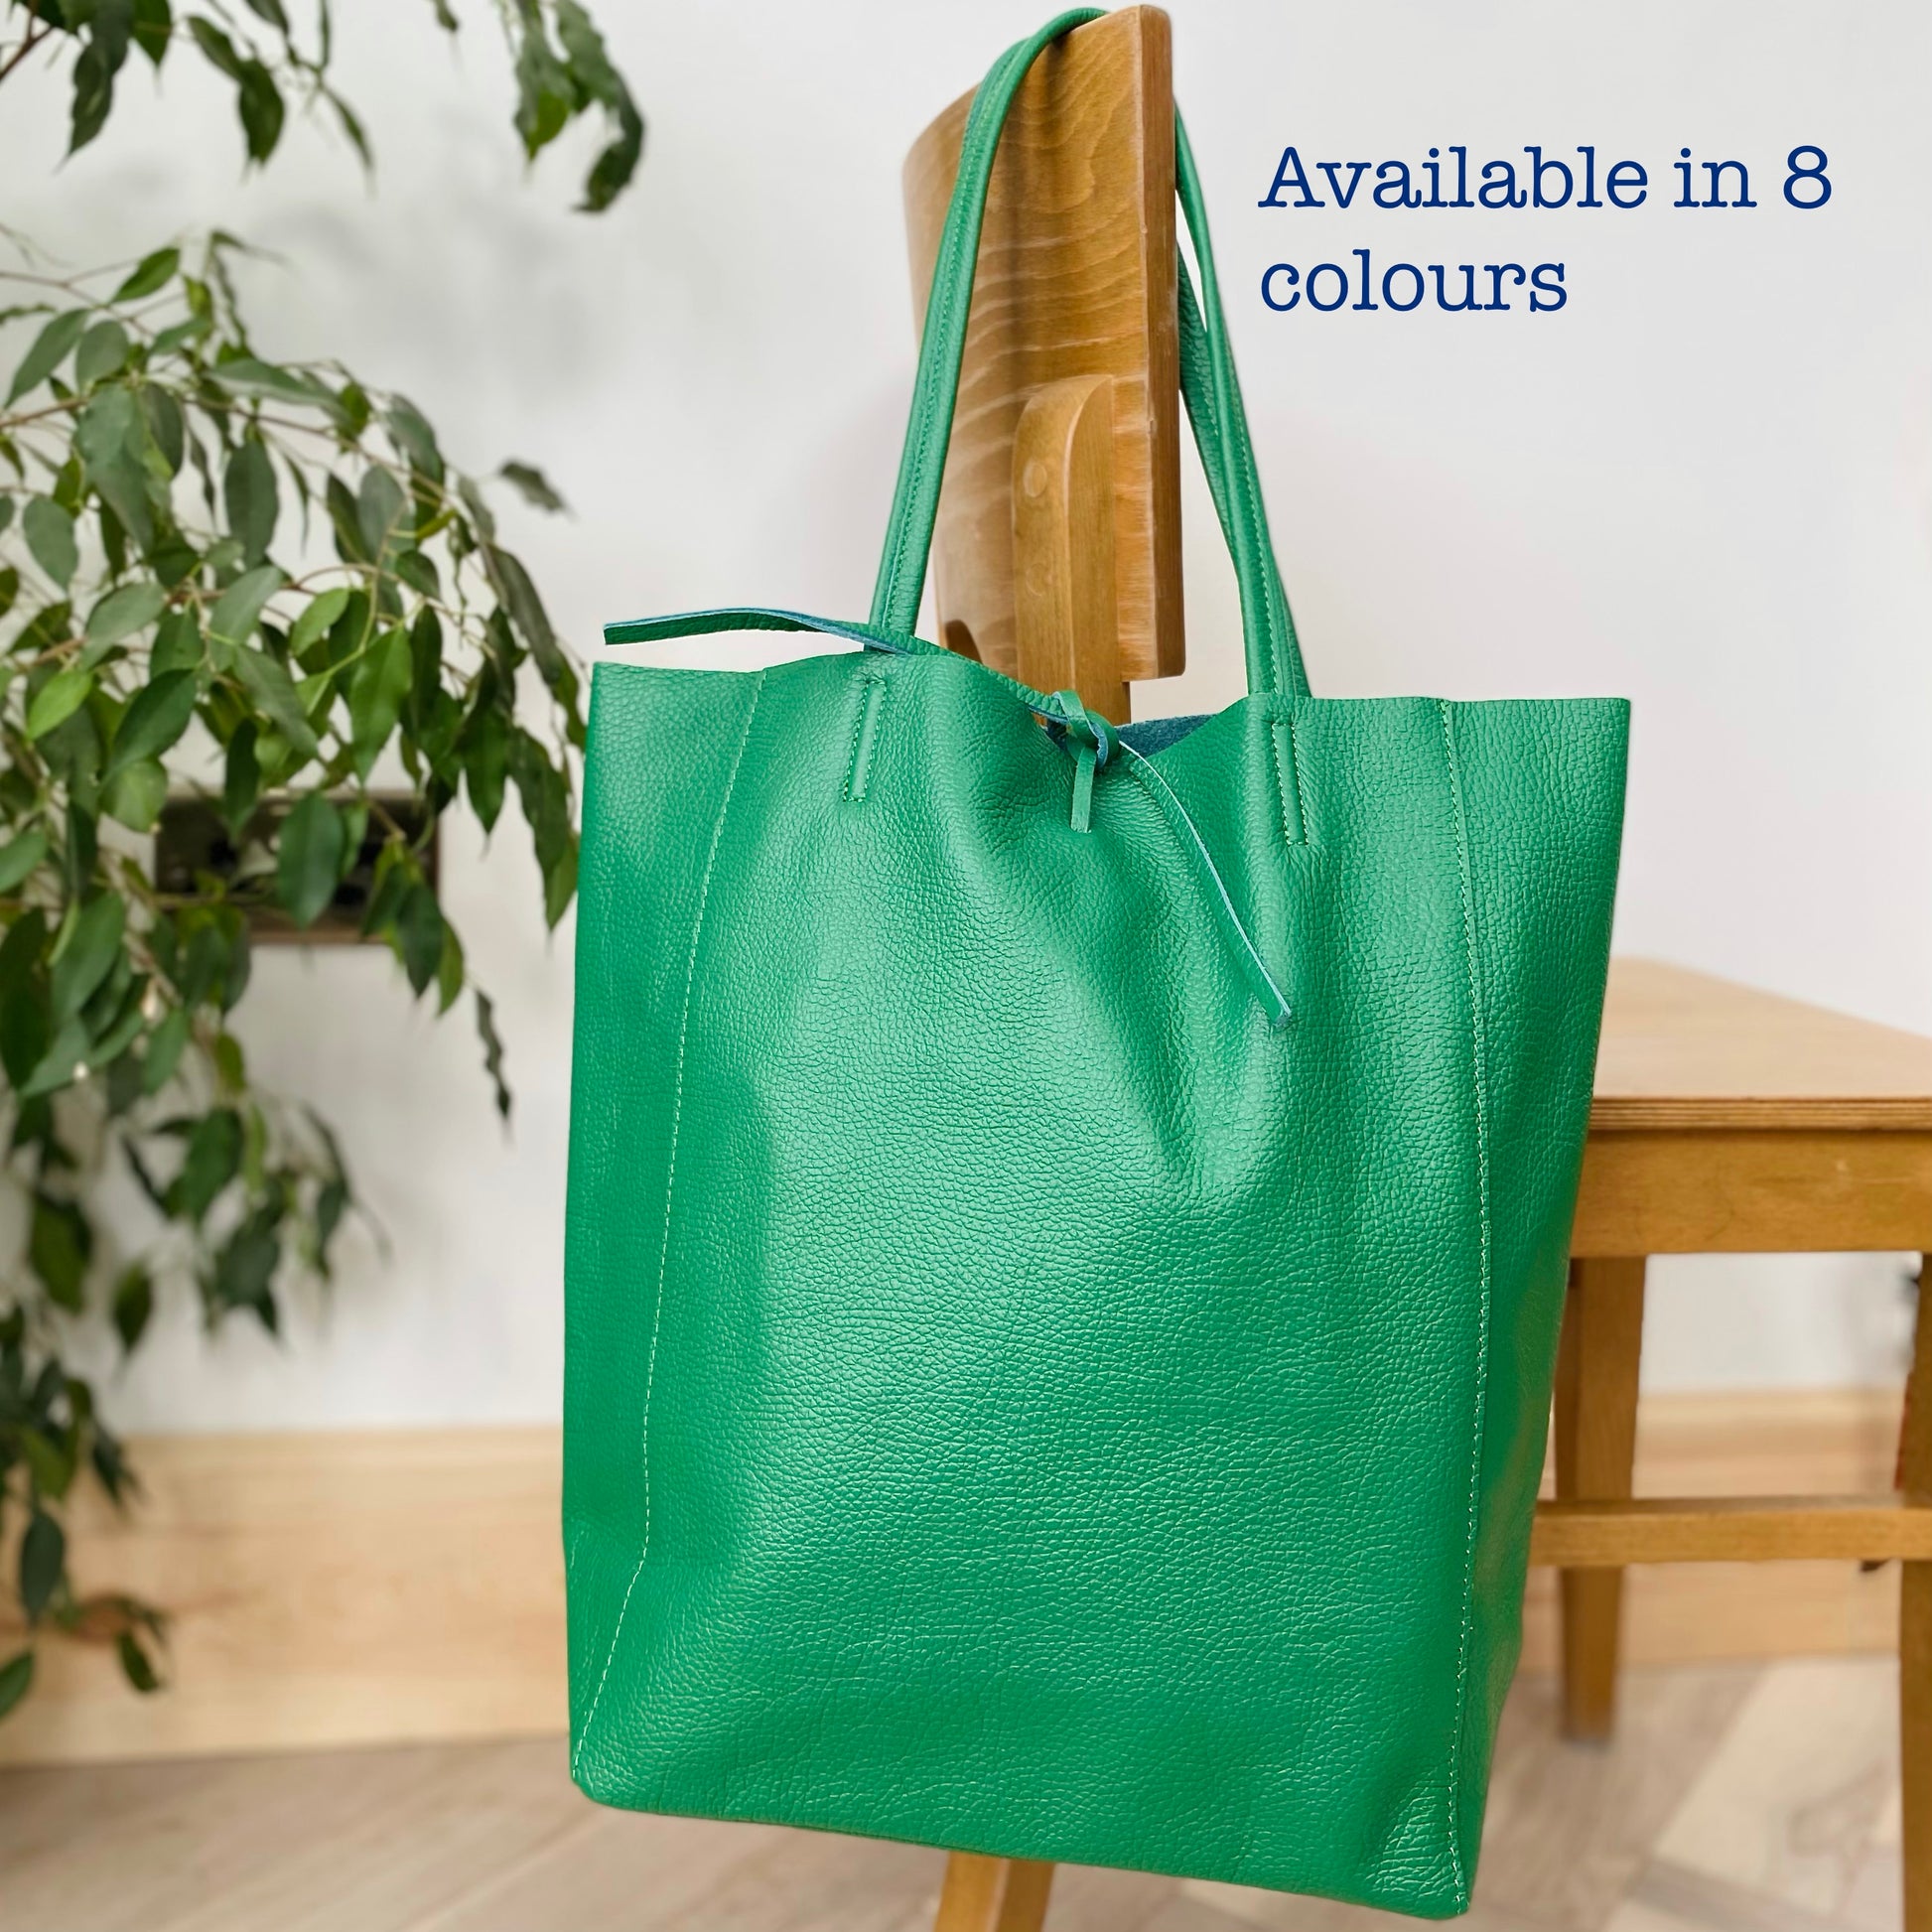      The Essential Leather shopper bag     Tie top fastening     Internal zip pocket     Bag dimensions 36cm (L) x 12cm (W) x 37cm (H)     Shoulder strap 28cm long     100% Leather      Pebble finish Leather     Made in Italy     Available in Black, Navy, Red, Mustard, Tan, Nude, Green and Blue